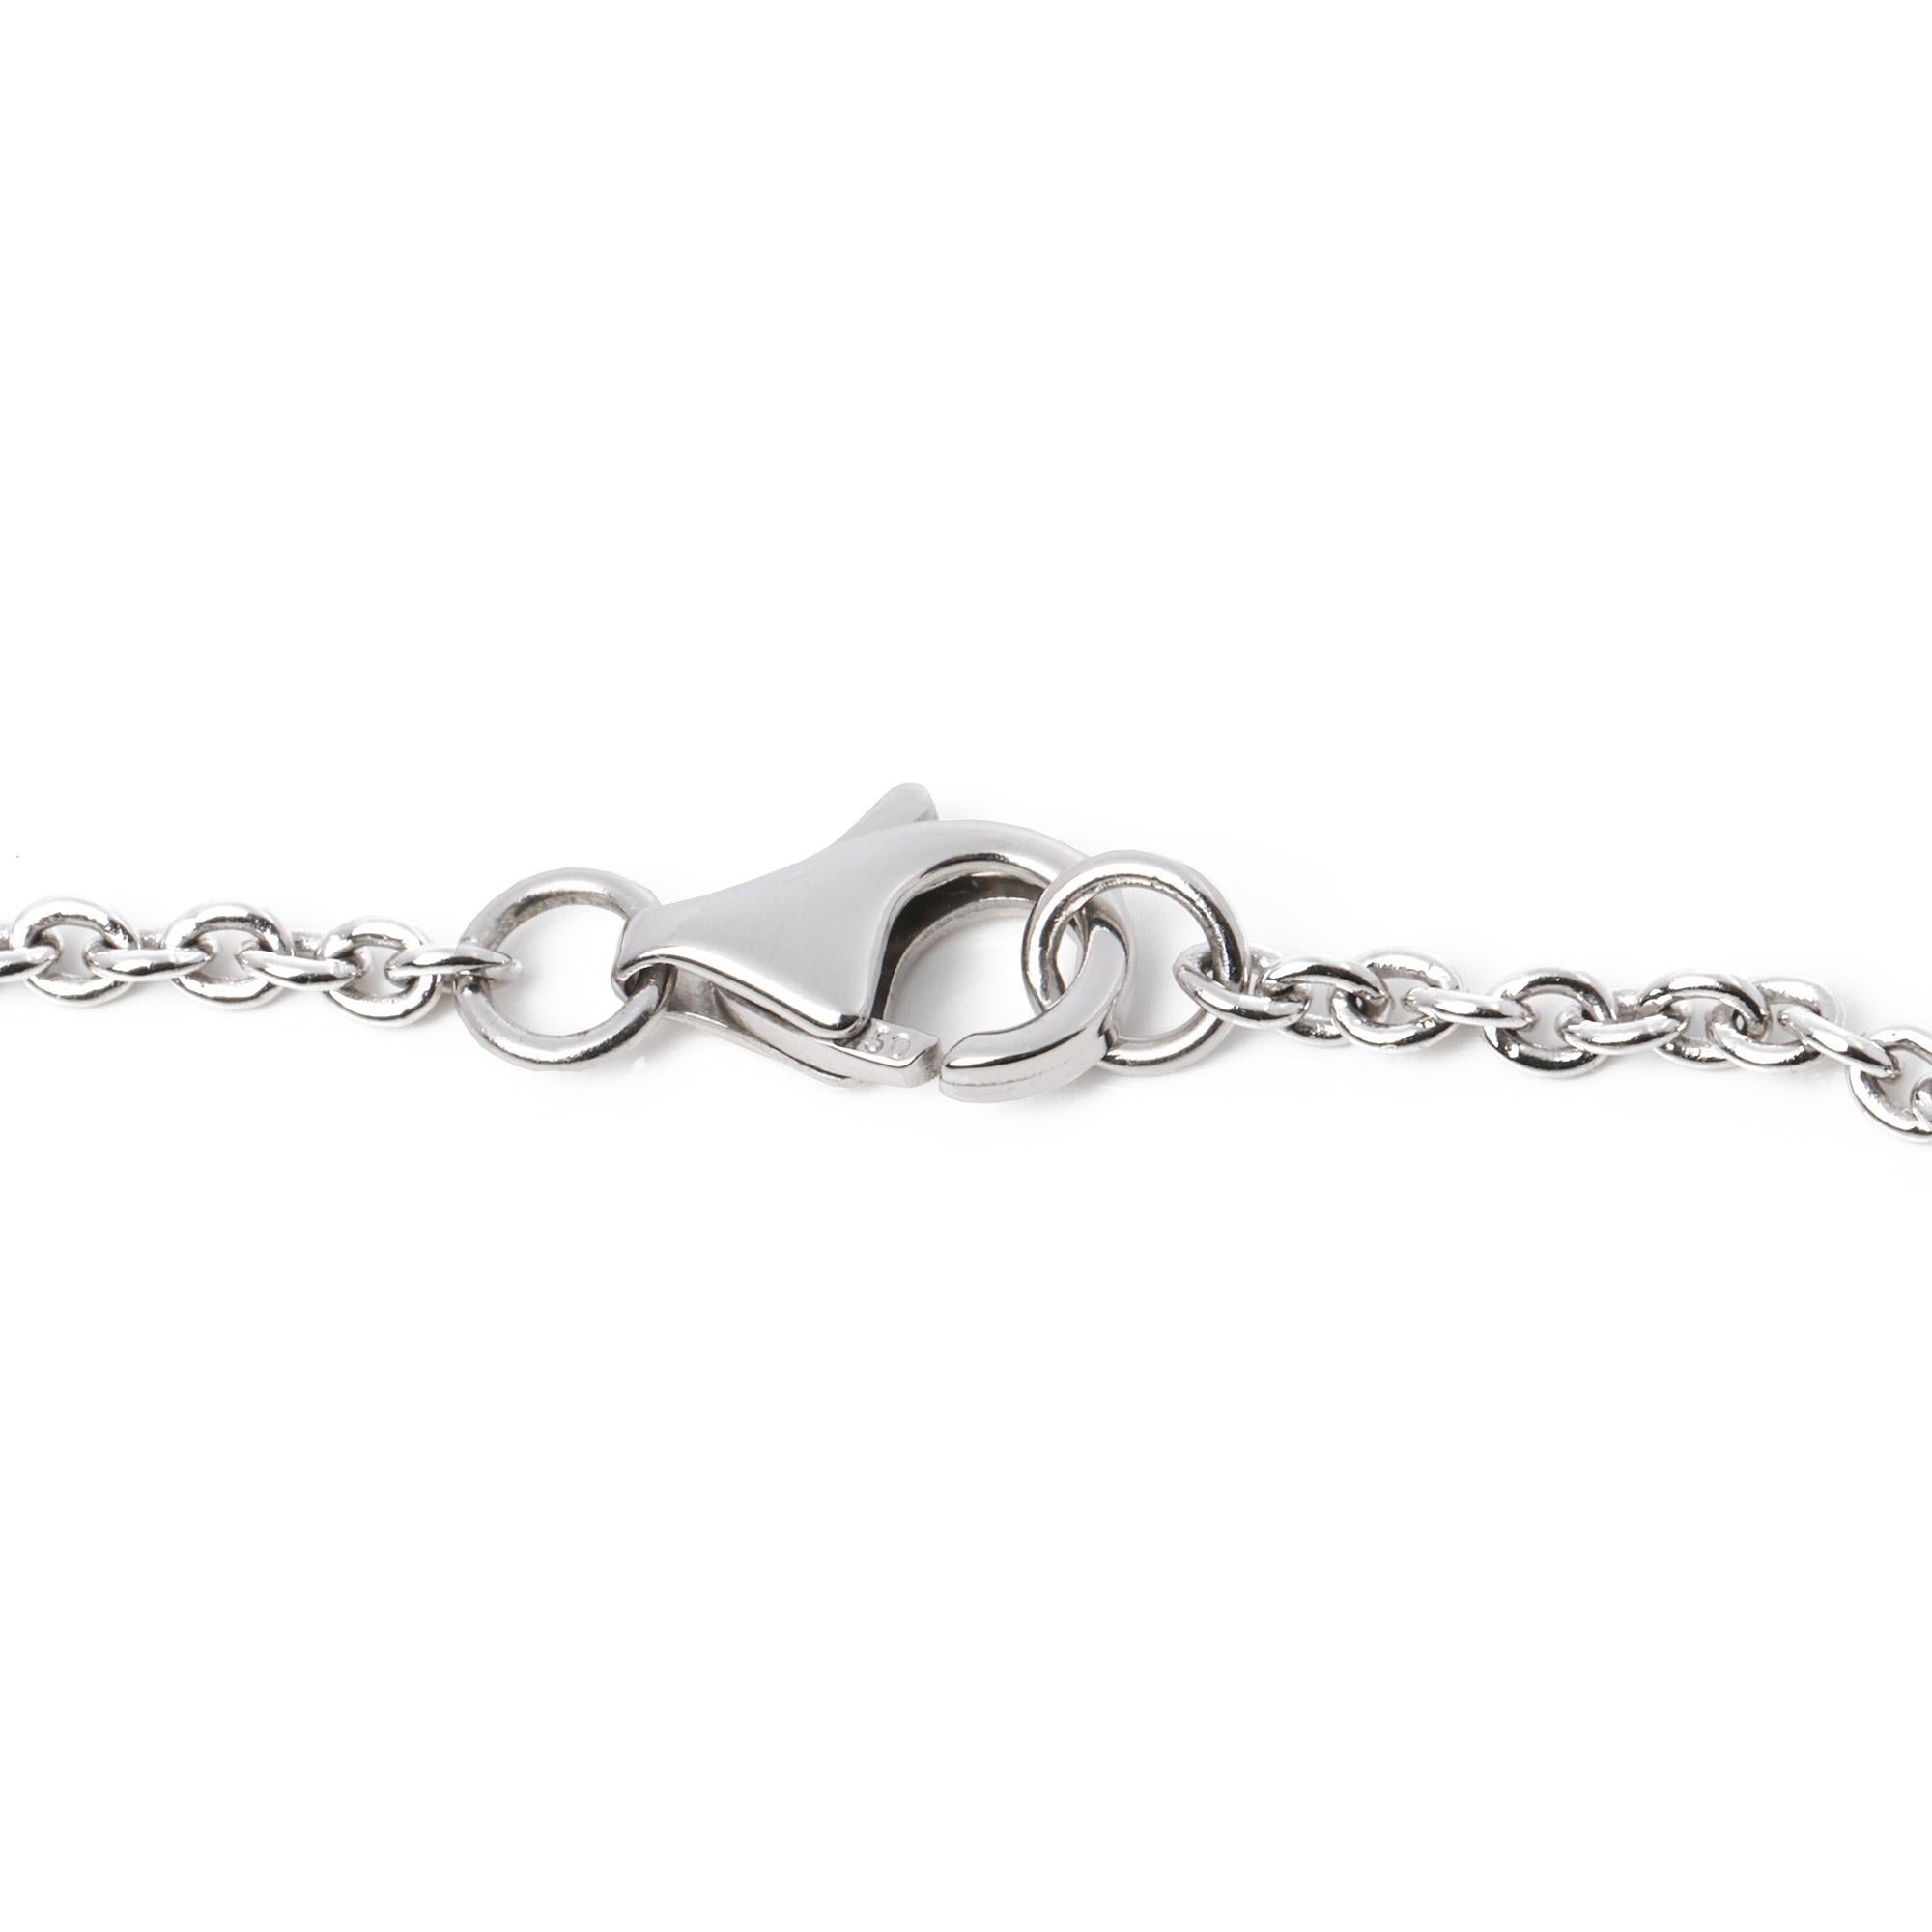 This bracelet by Cartier is from their Love collection and features two interlinking pendants with their iconic screw detailing, set in 18k white gold. Accompanied by a Cartier box. Our Xupes reference is J561 should you need to quote this. 